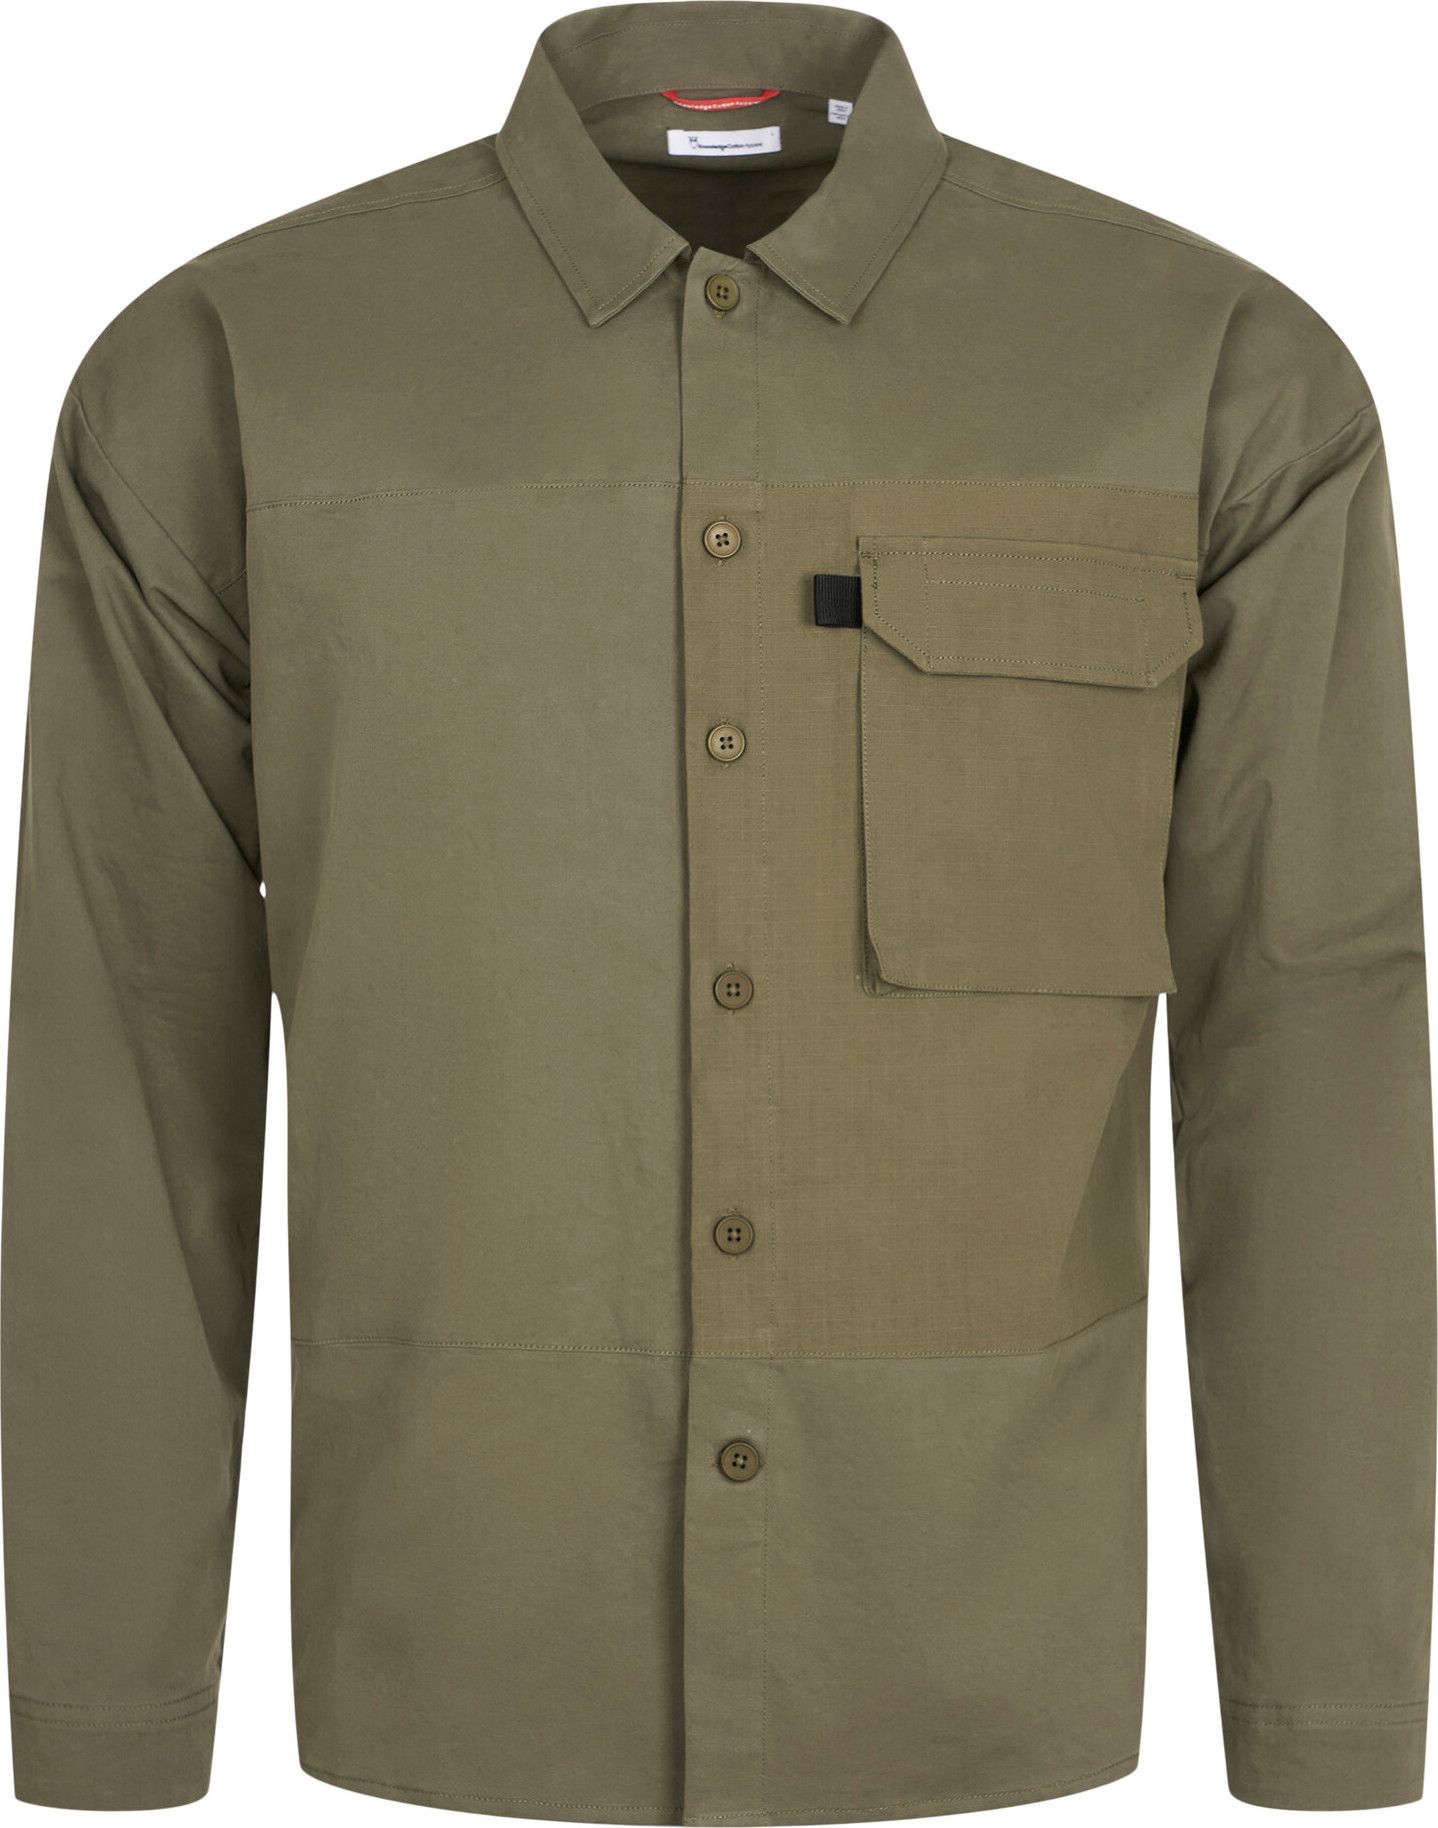 Men's Outdoor Twill Overshirt With Contrast Fabric Burned Olive